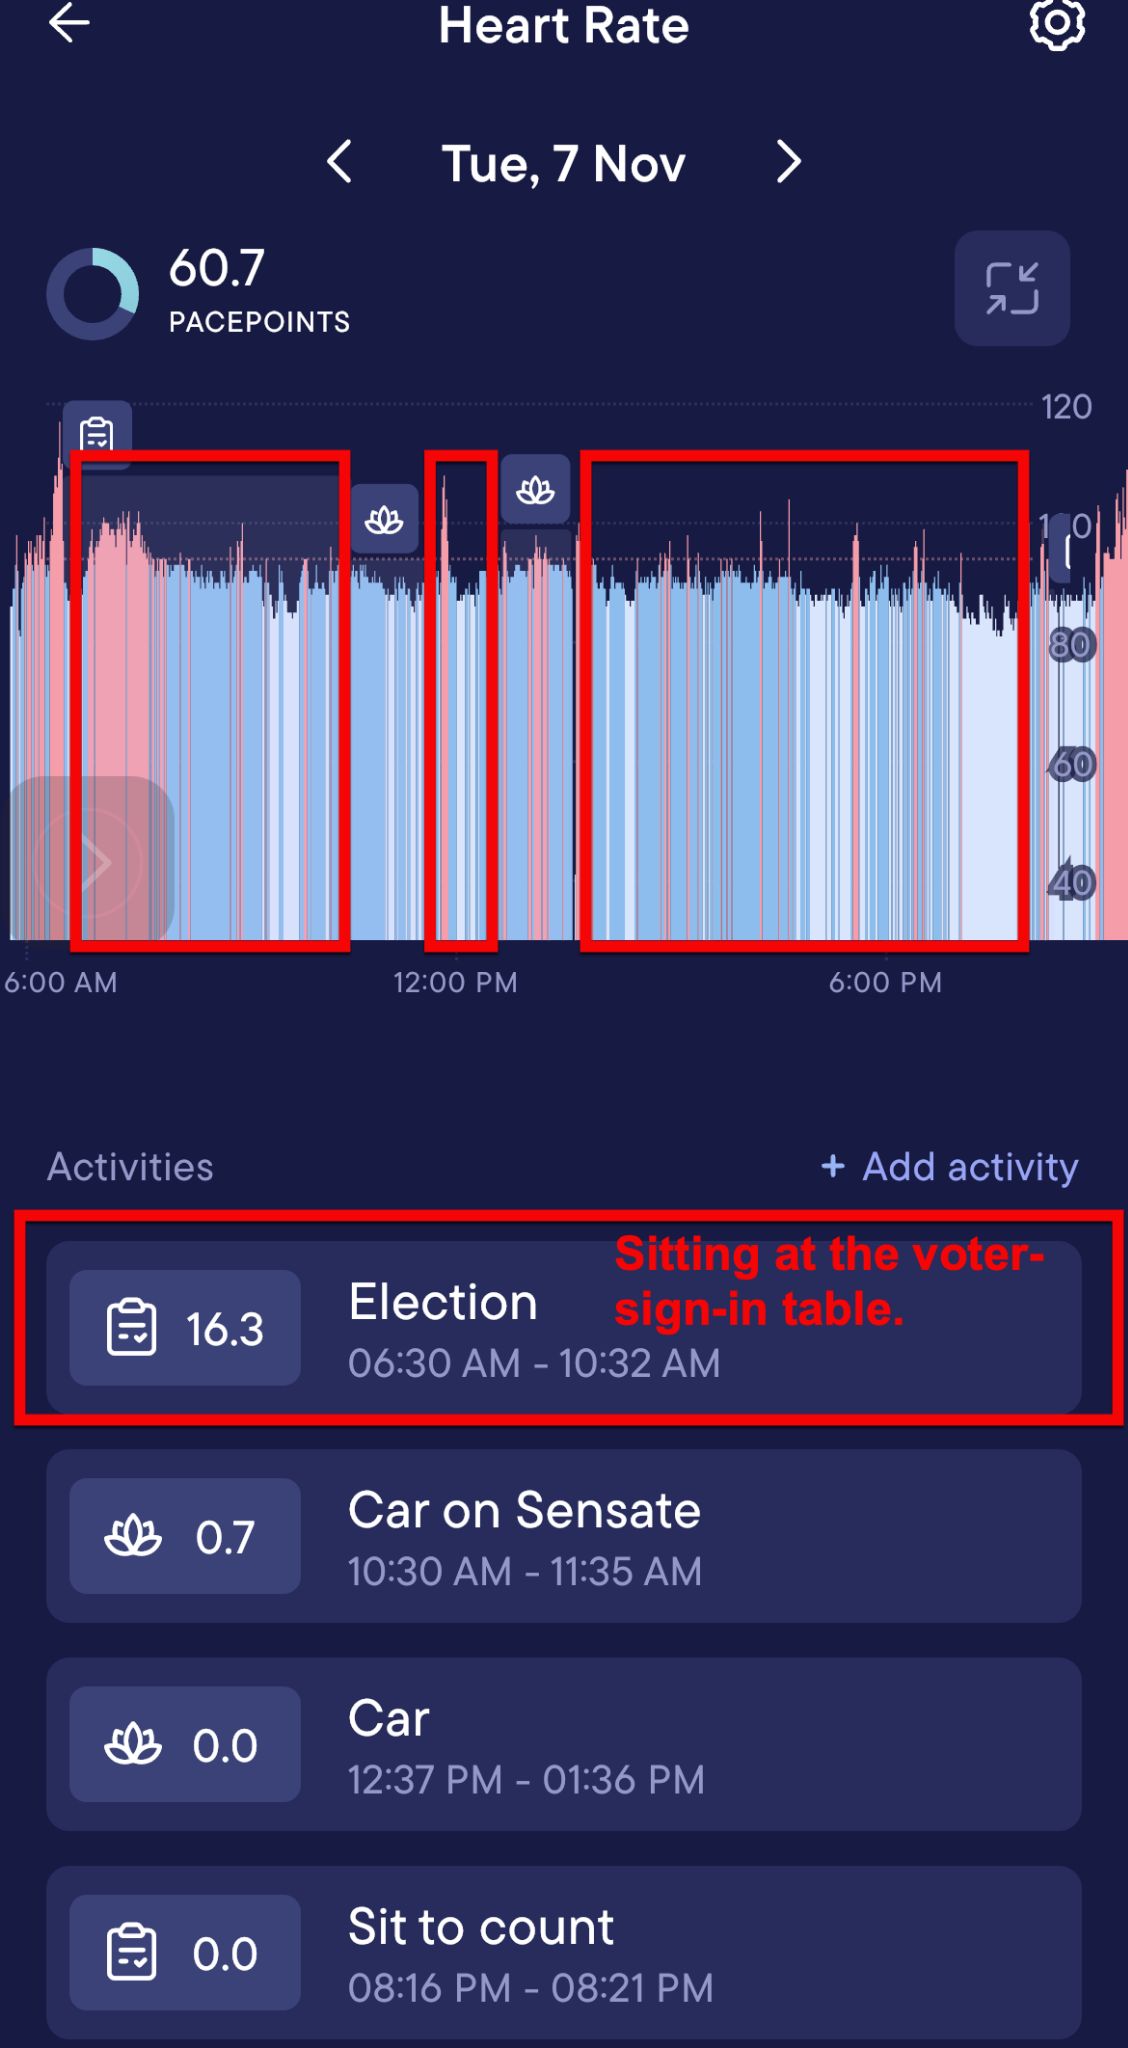 Heart Rate Measurements Election Day